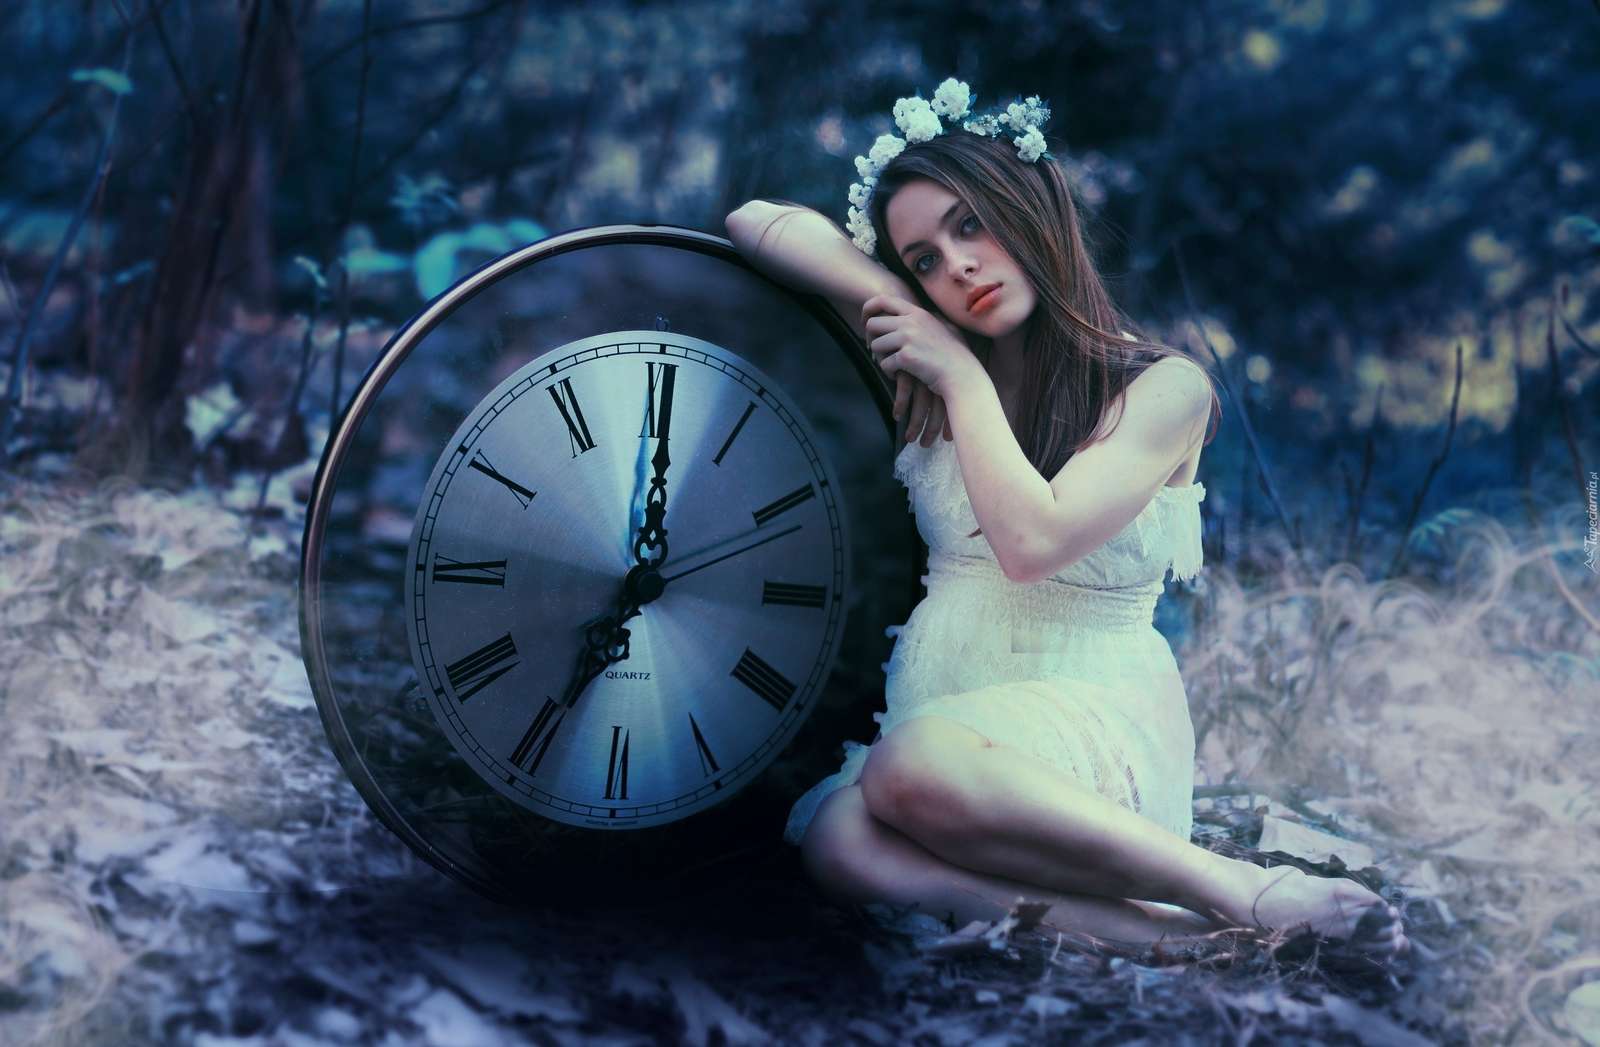 GIRL IN WHITE WITH A CLOCK jigsaw puzzle online